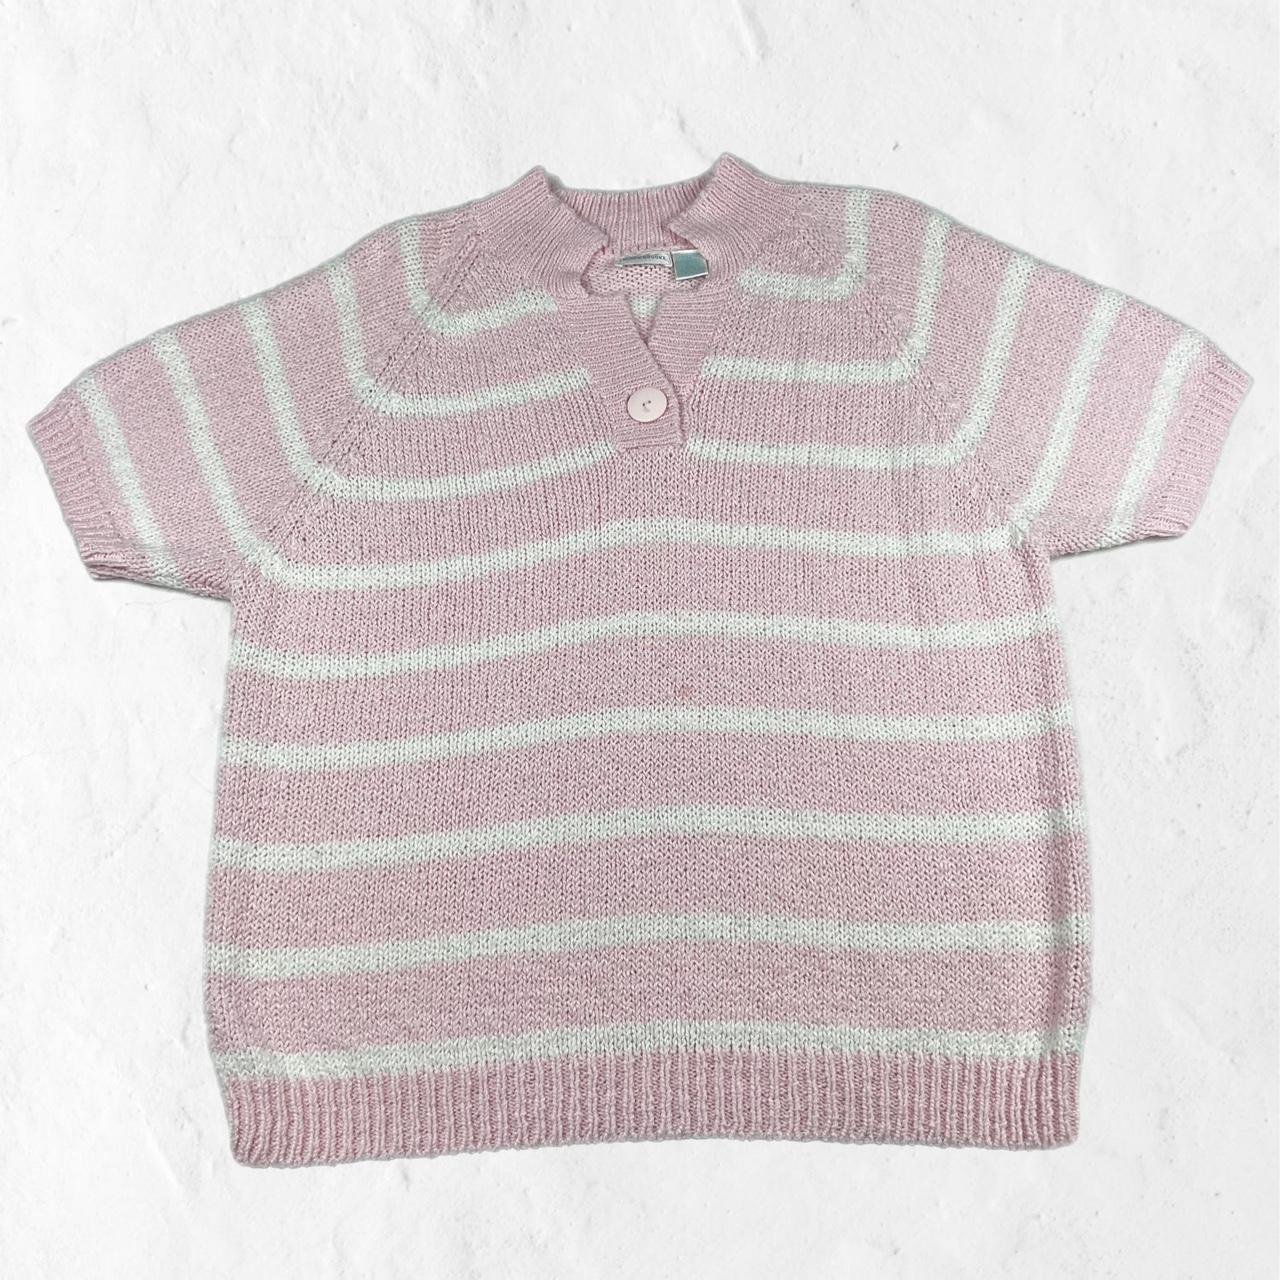 Product Image 1 - Pastel Pink & White Striped